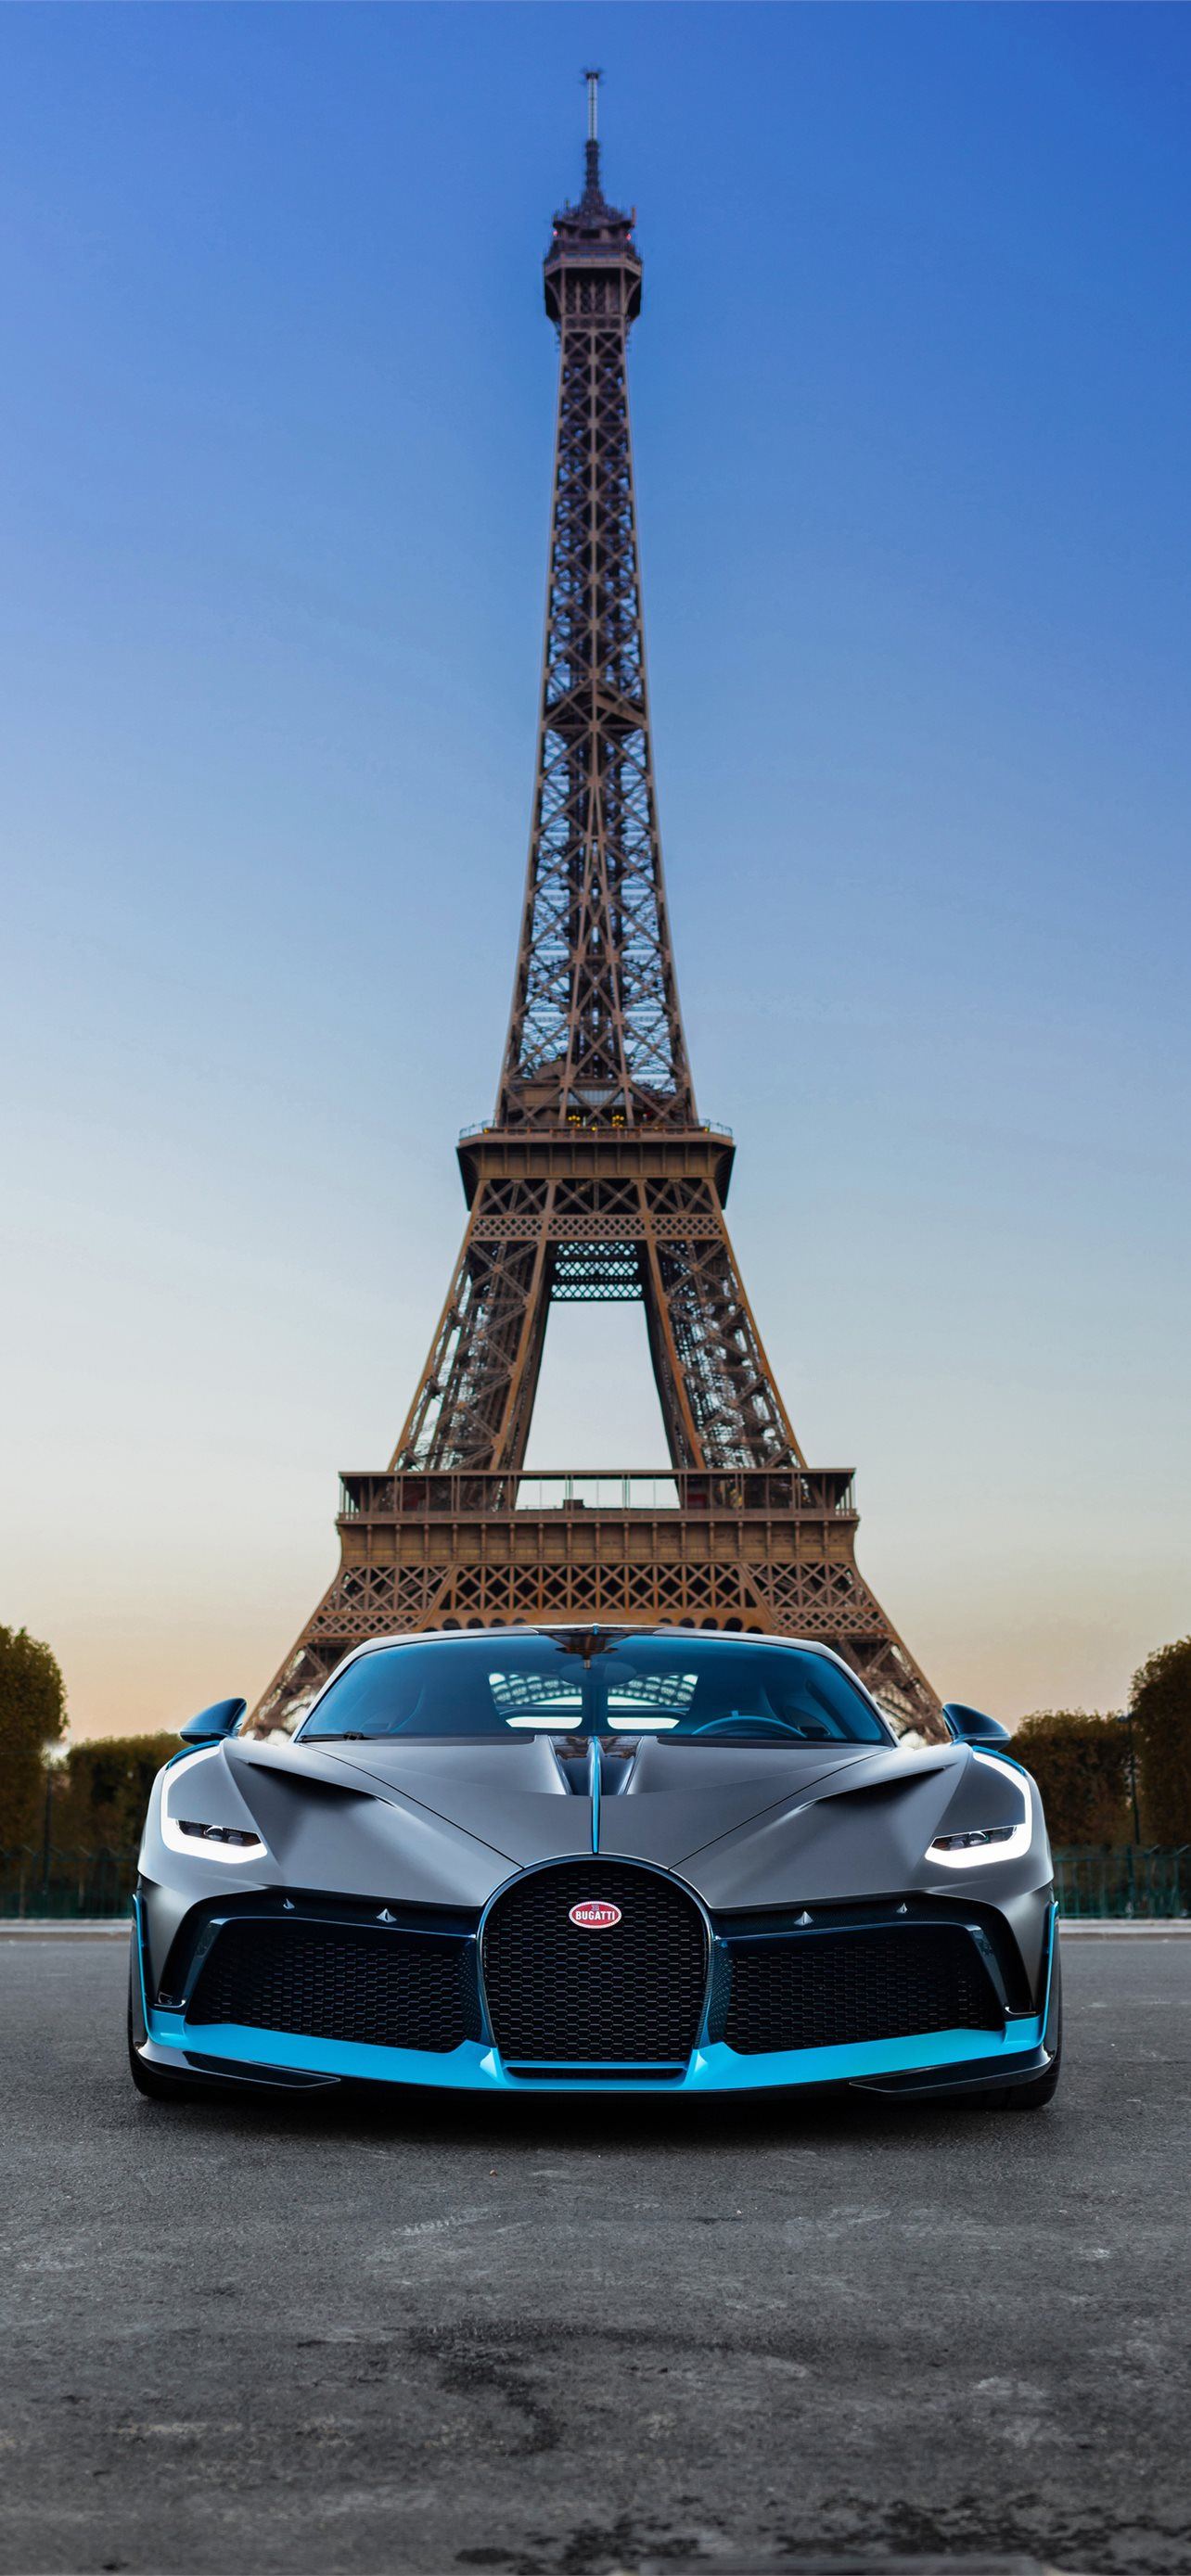 variabel album woede Bugatti Divo 2018 Paris France Samsung Galaxy Note... iPhone Wallpapers  Free Download